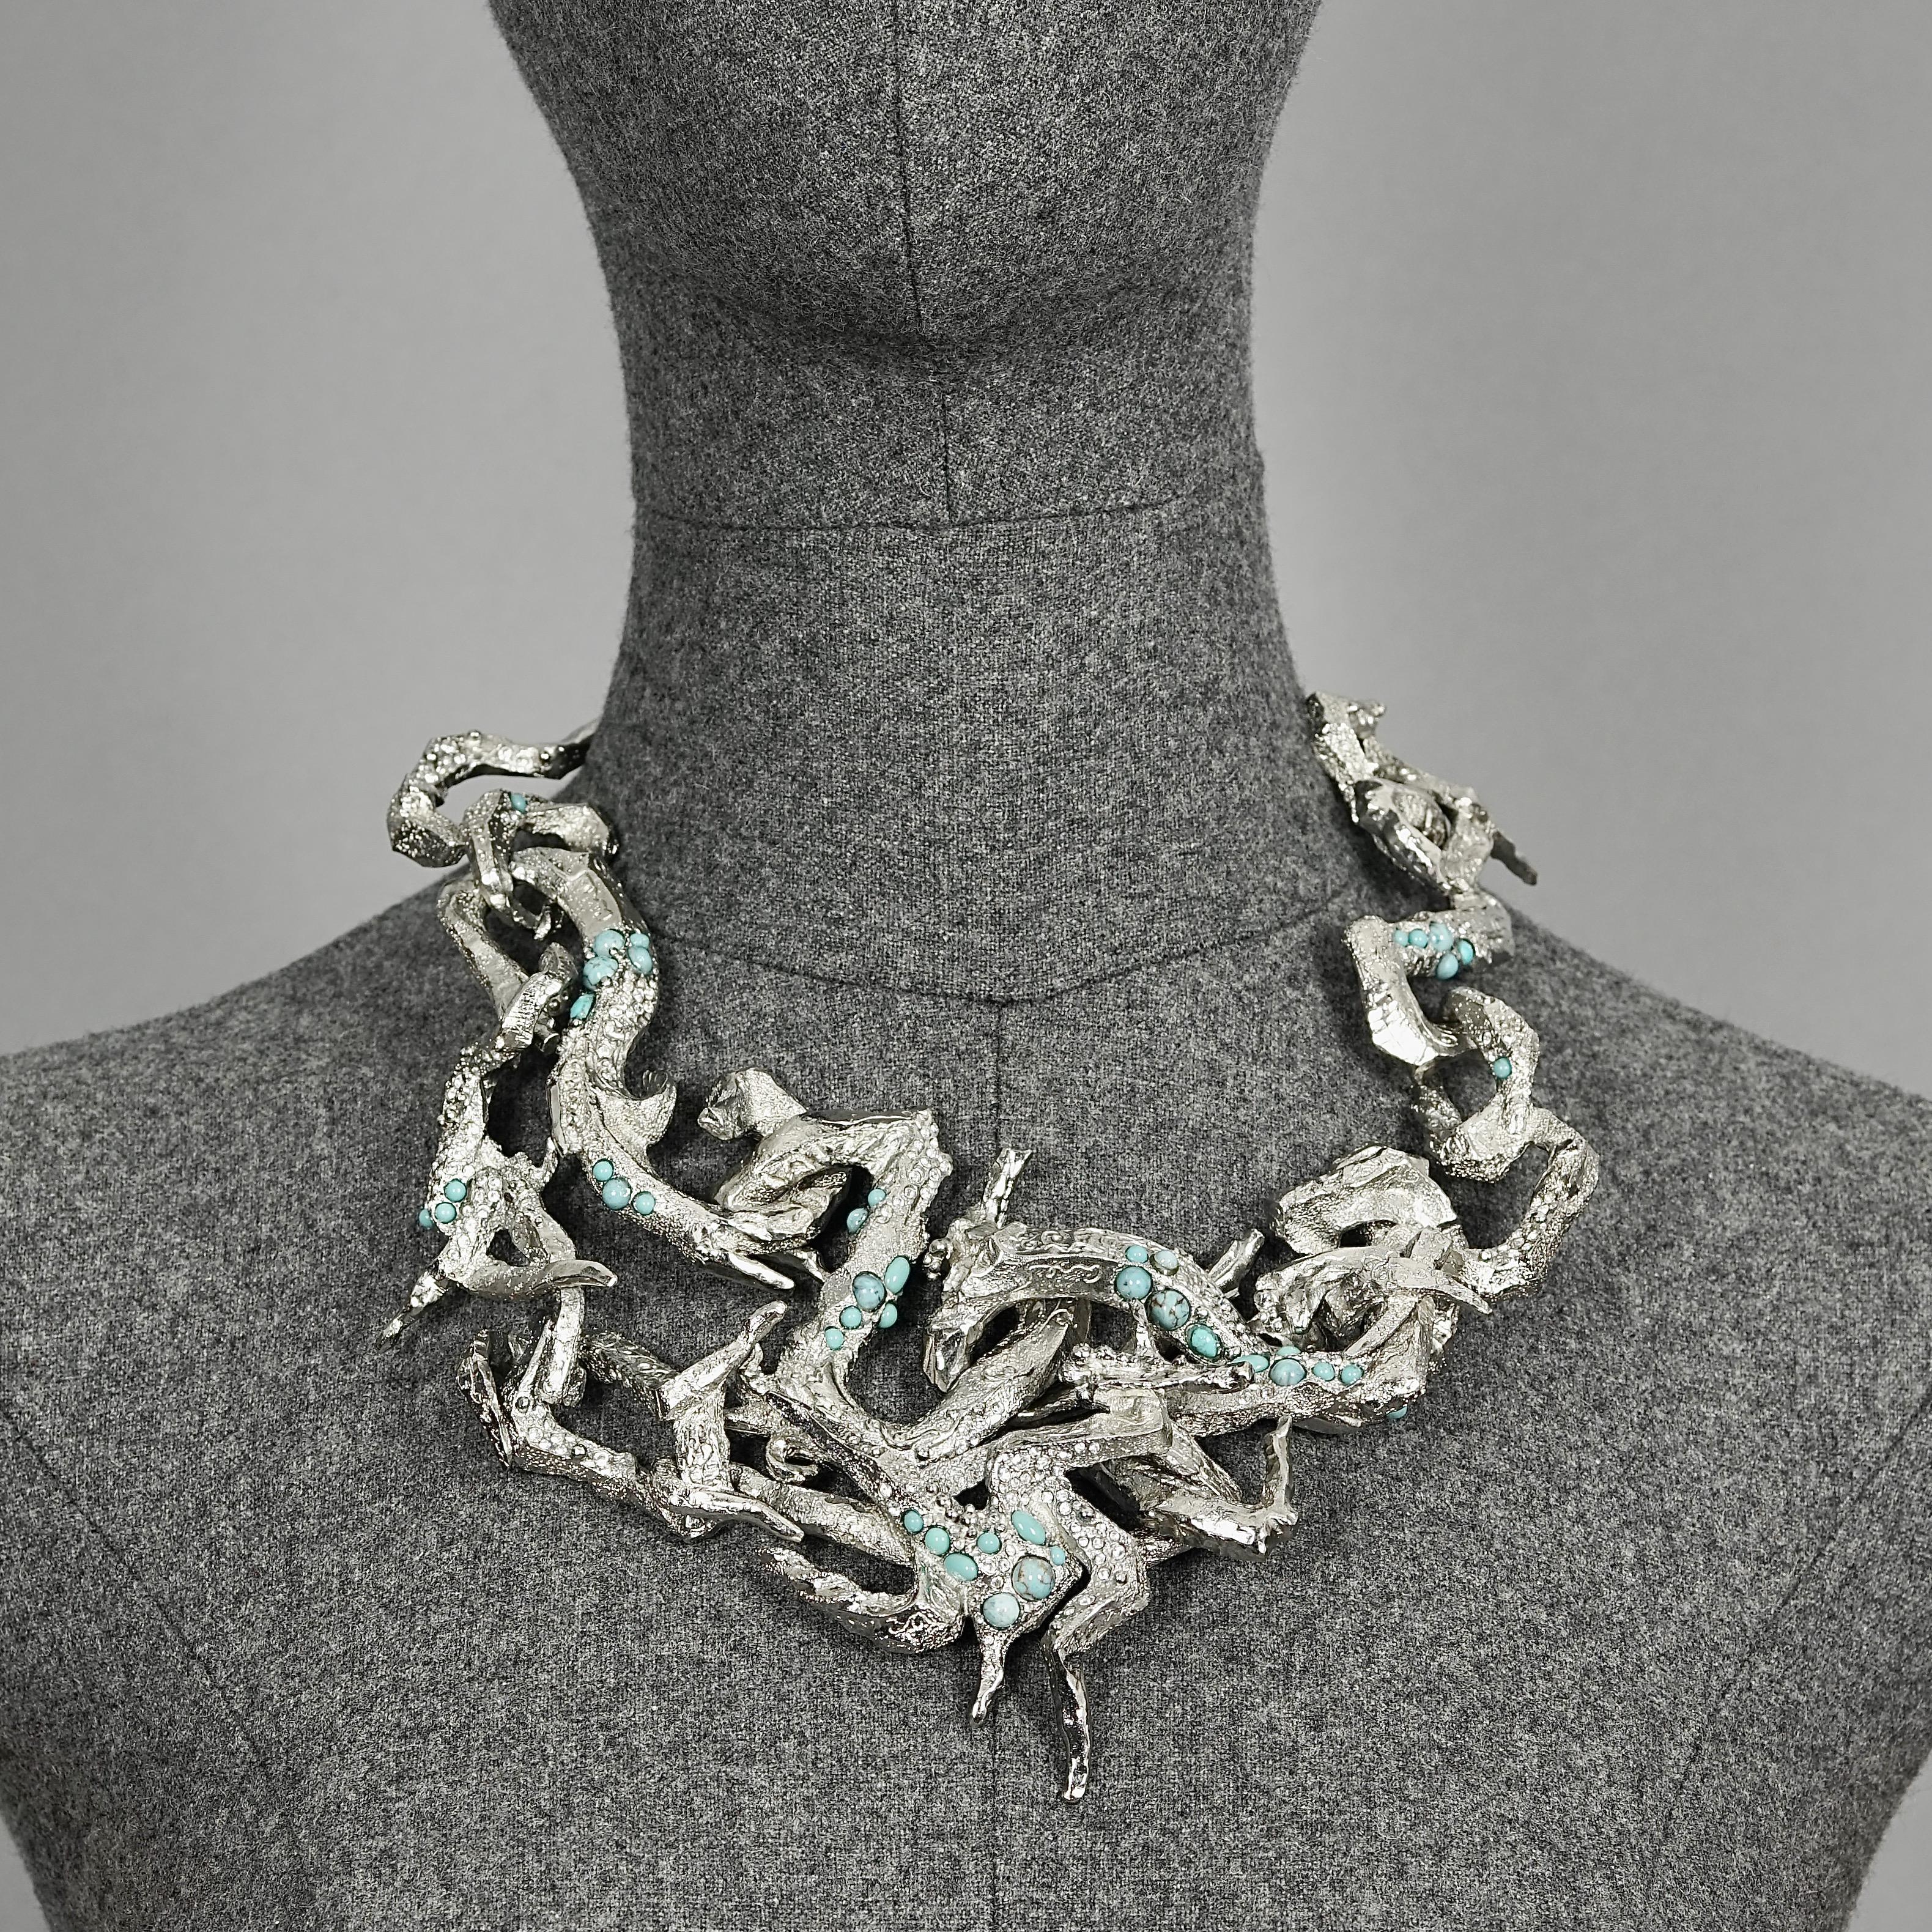 Vintage CHRISTIAN LACROIX Opulent Rigid Turquoise Stone Choker Necklace

Measurements:
Height: 4.72 inches (12 cm)
Wearable Length: 16.53 inches to 18.50 inches (42 cm to 47 cm)

Features:
- 100% Authentic CHRISTIAN LACROIX.
- Articulated textured